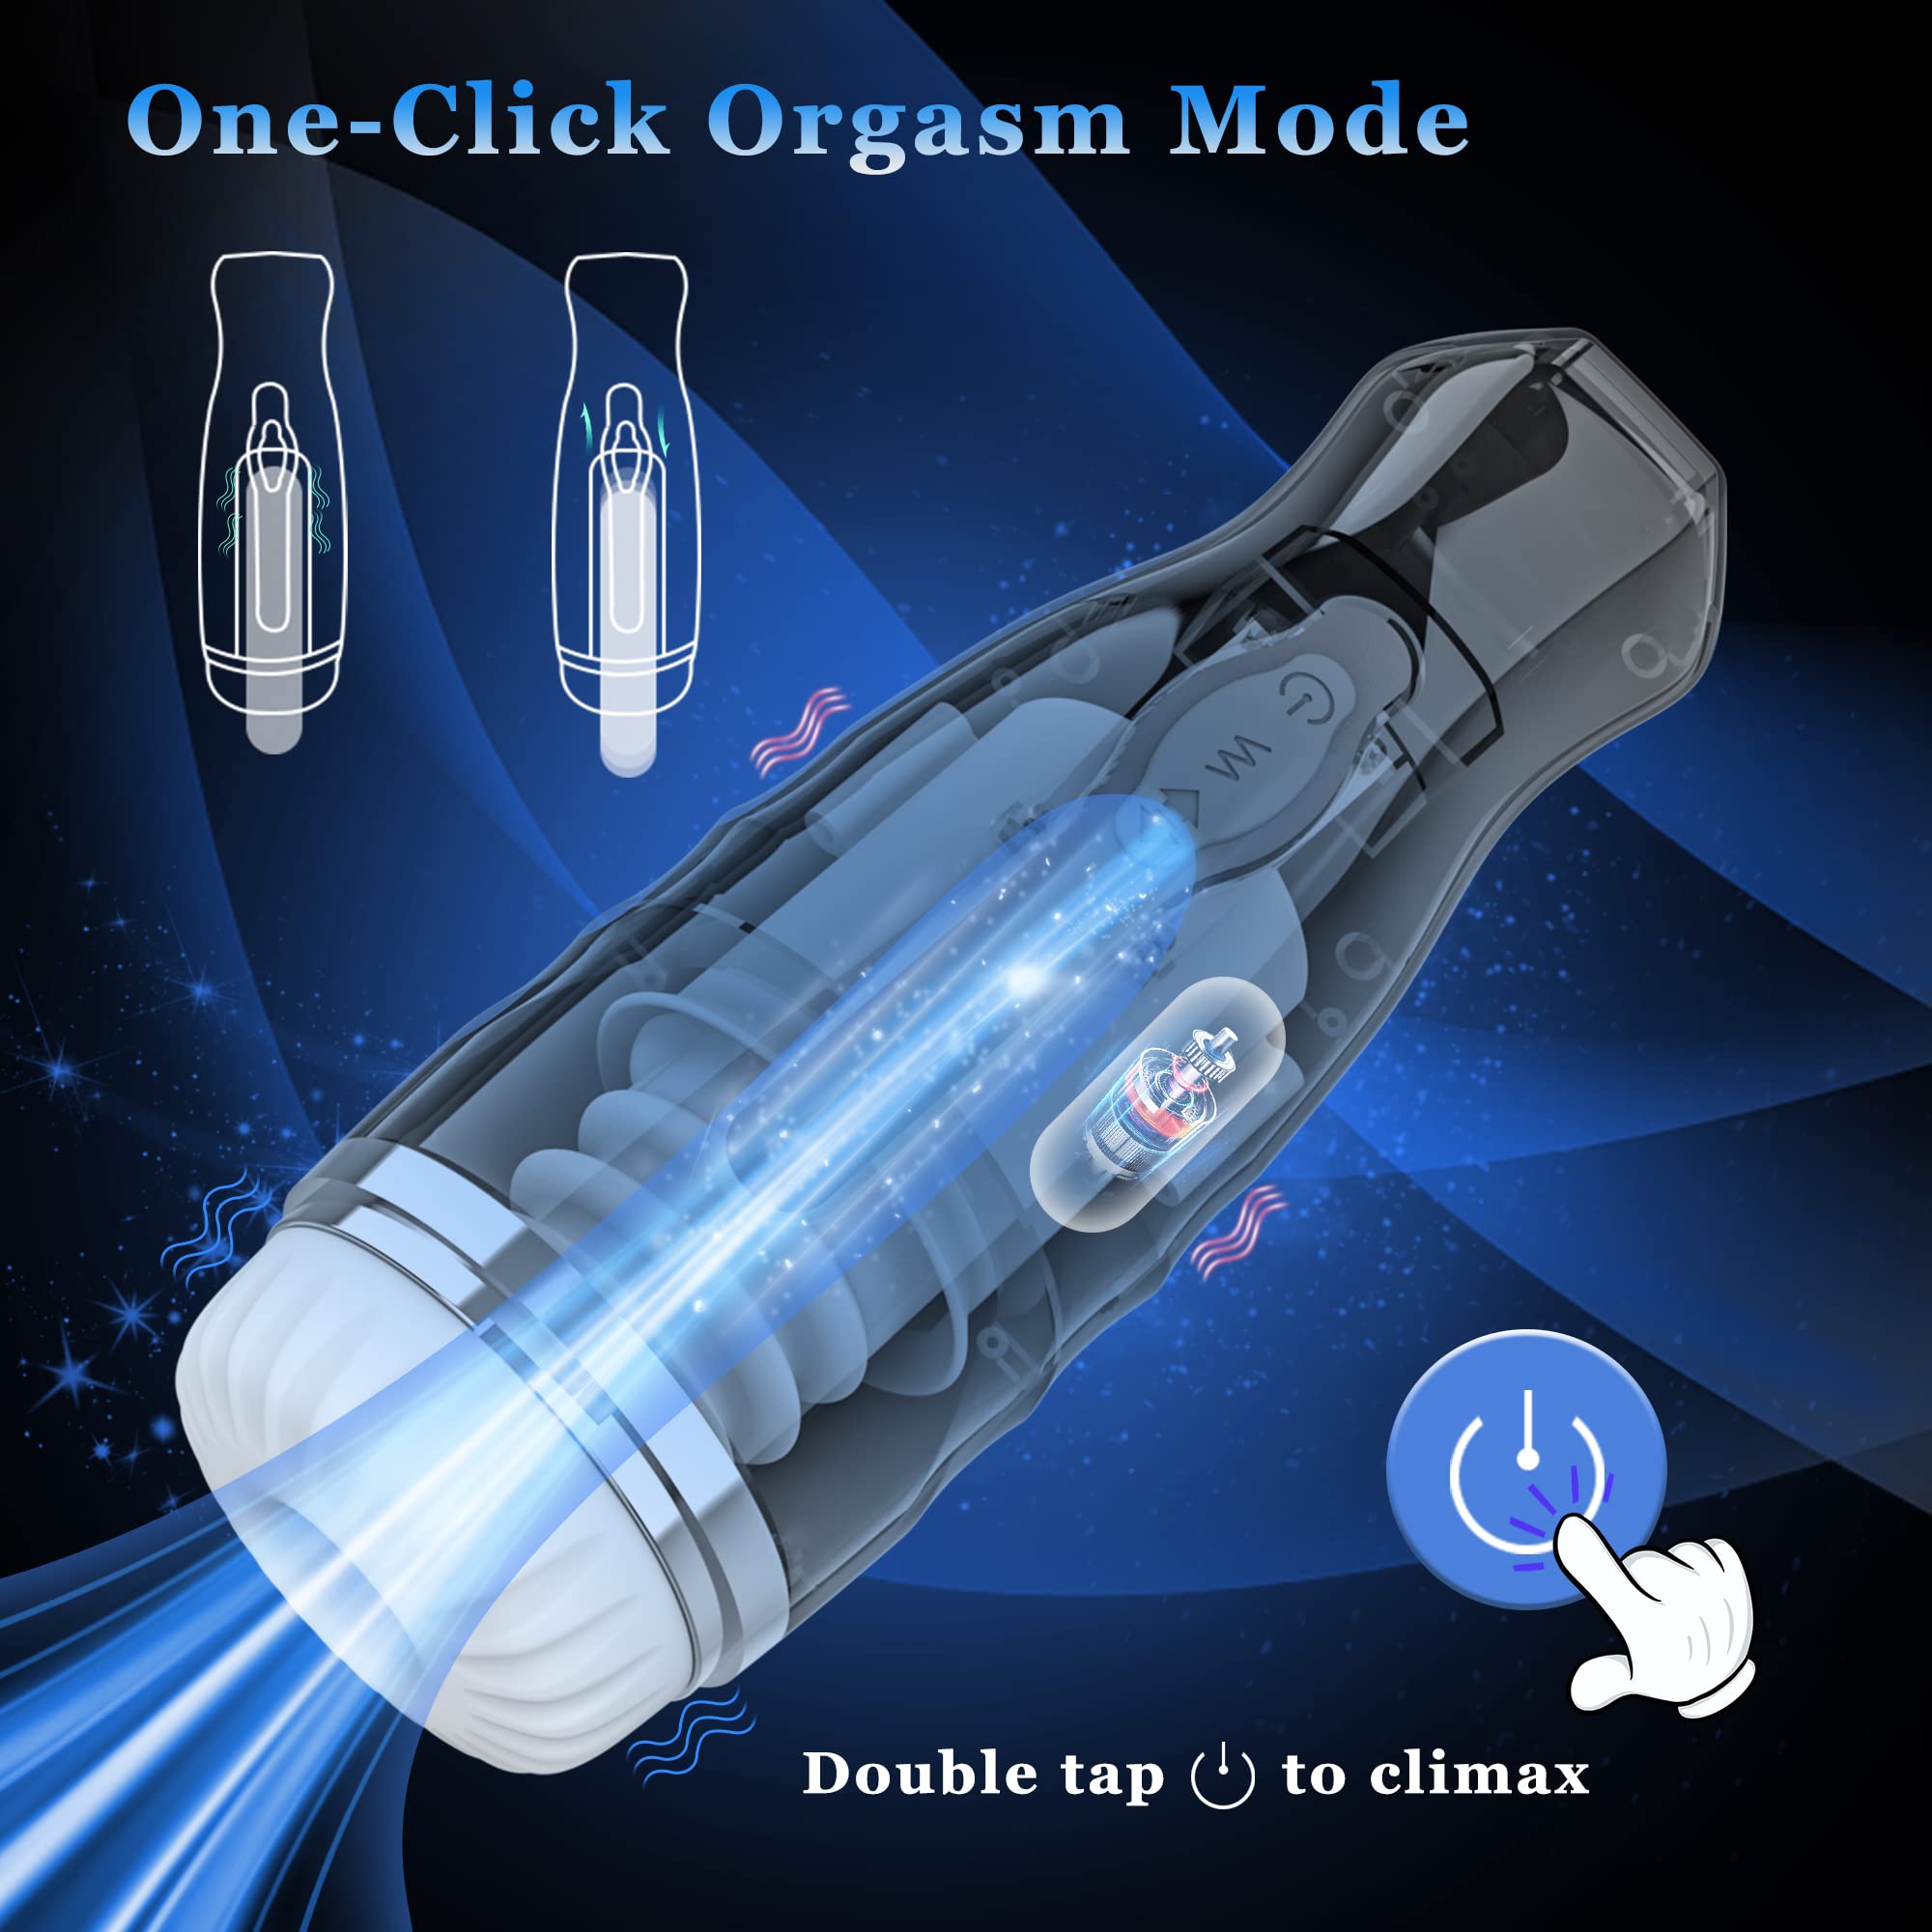 FIDECH Single-Function Control Thrusting Vibrating Male Electric Stroker